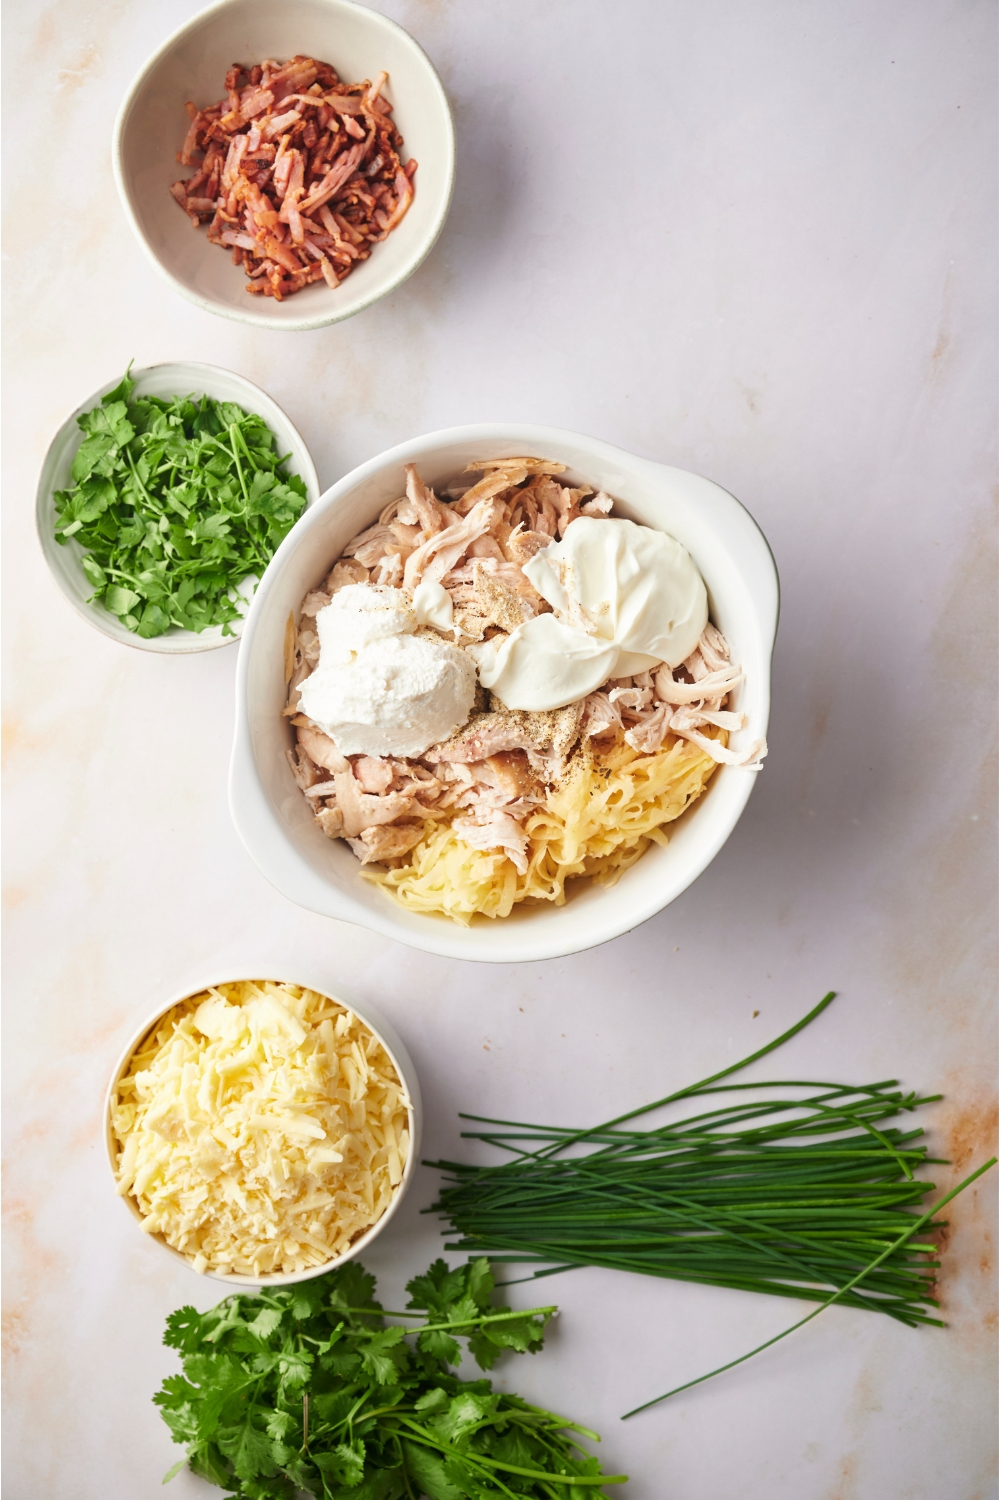 White mixing bowl filled with shredded chicken, cream cheese, spices, and uncooked hashbrowns, surrounded by bowls of other ingredients including bacon, fresh herbs, and shredded cheese.